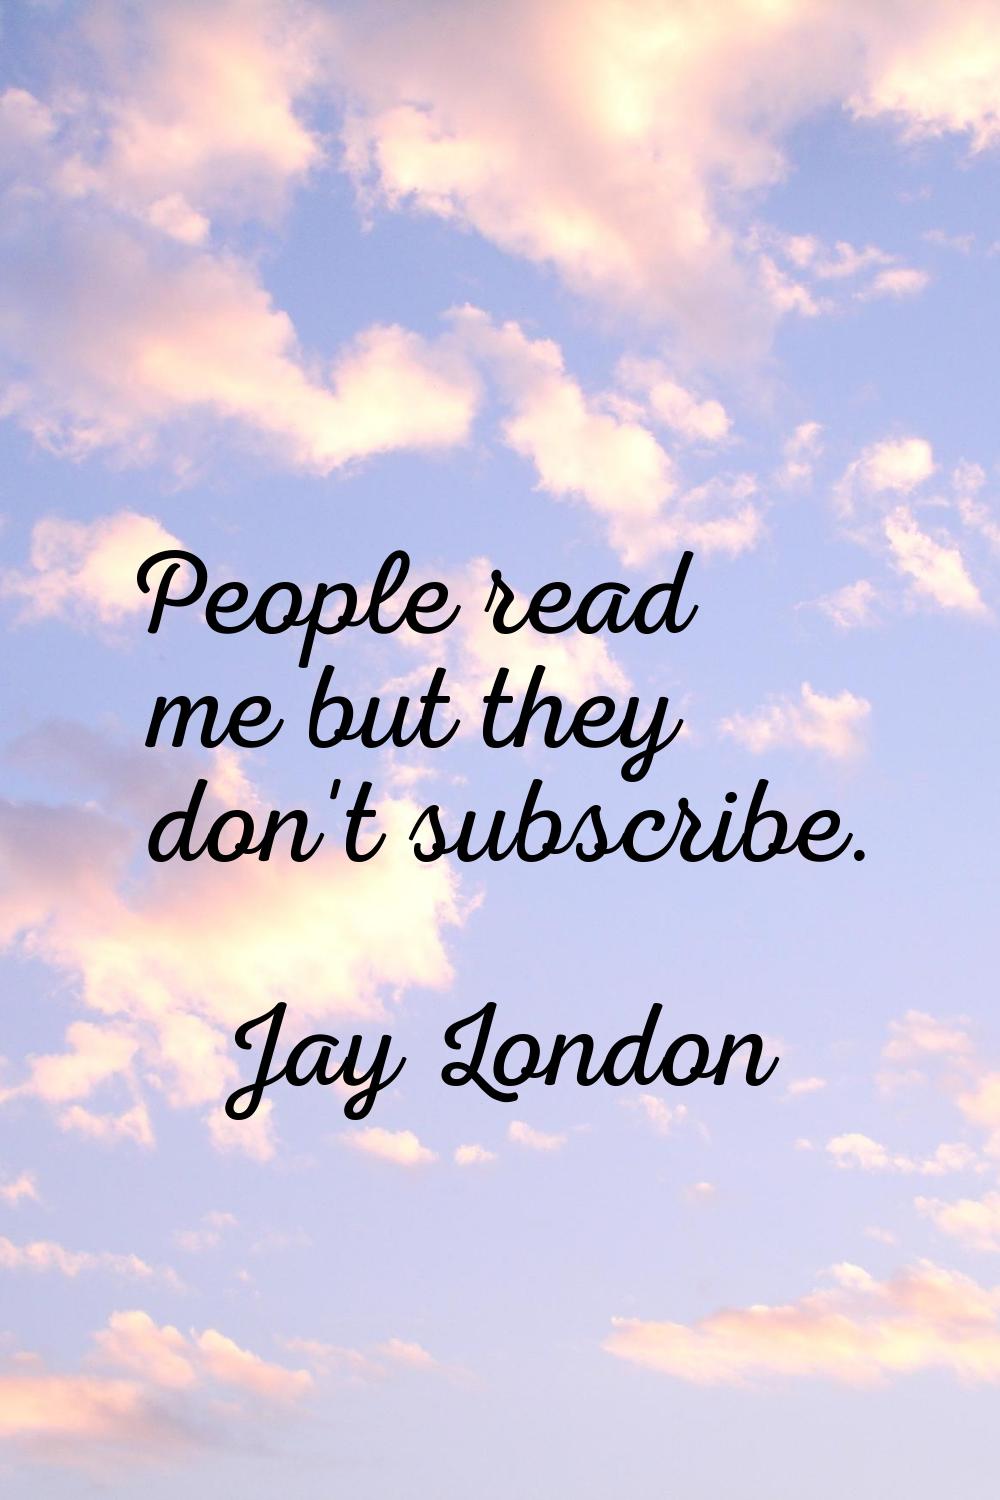 People read me but they don't subscribe.